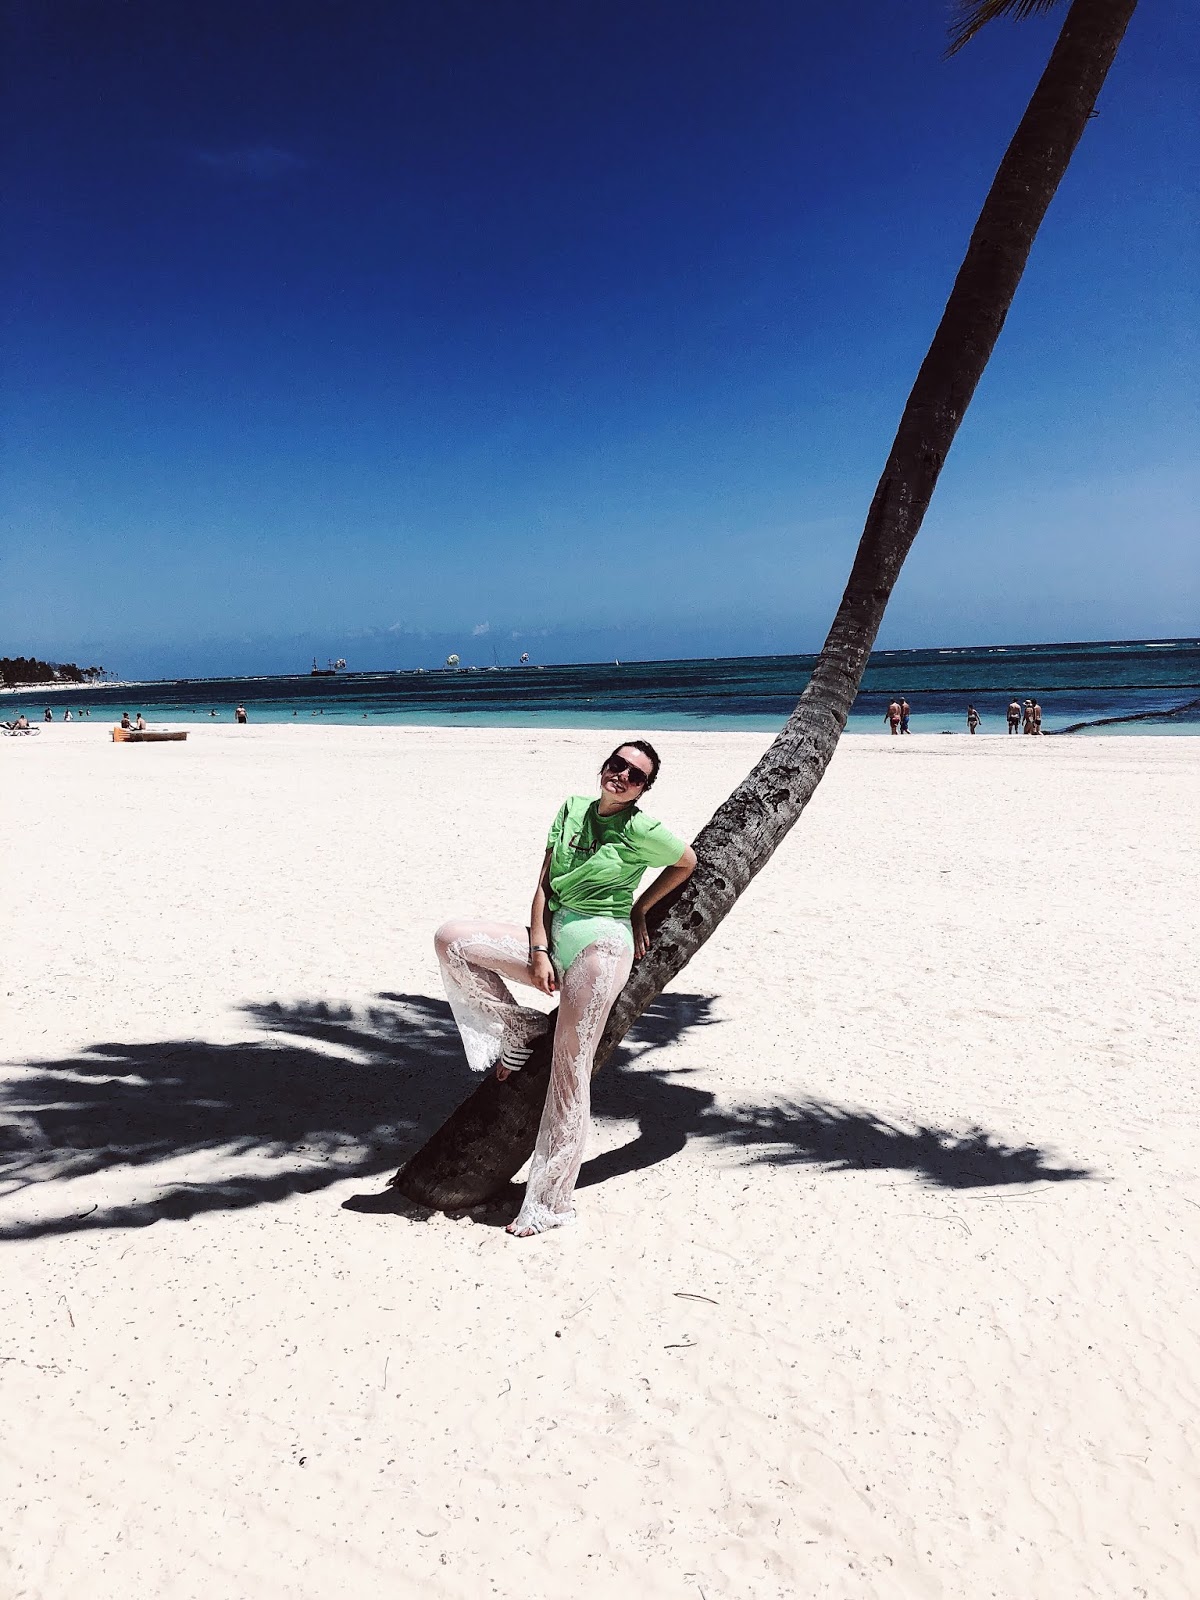 punta cana 2018, dominican repbulic, melia caribe punta cana, missguided lace trousers, travel guide, post holiday blues, how to beat post holiday blues, neon bikini, asos neon bikini, missguided haul